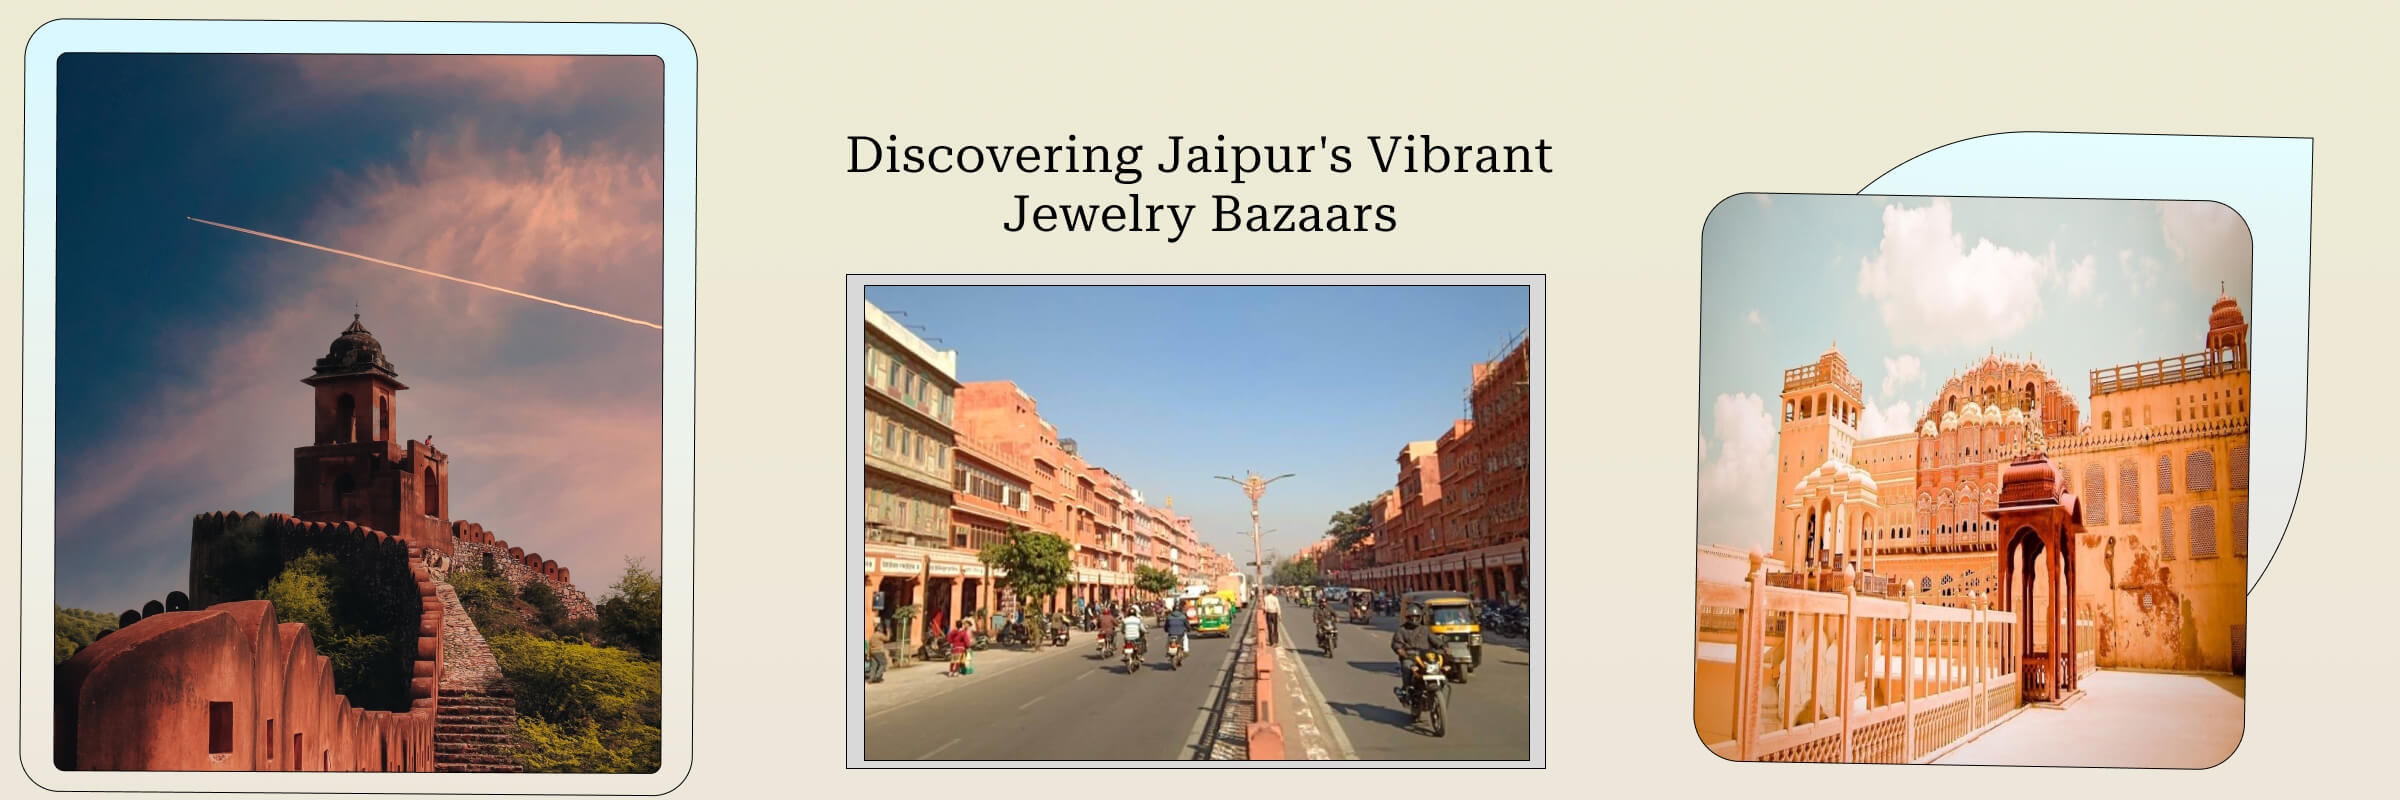 About Jewelry Bazaars of Jaipur